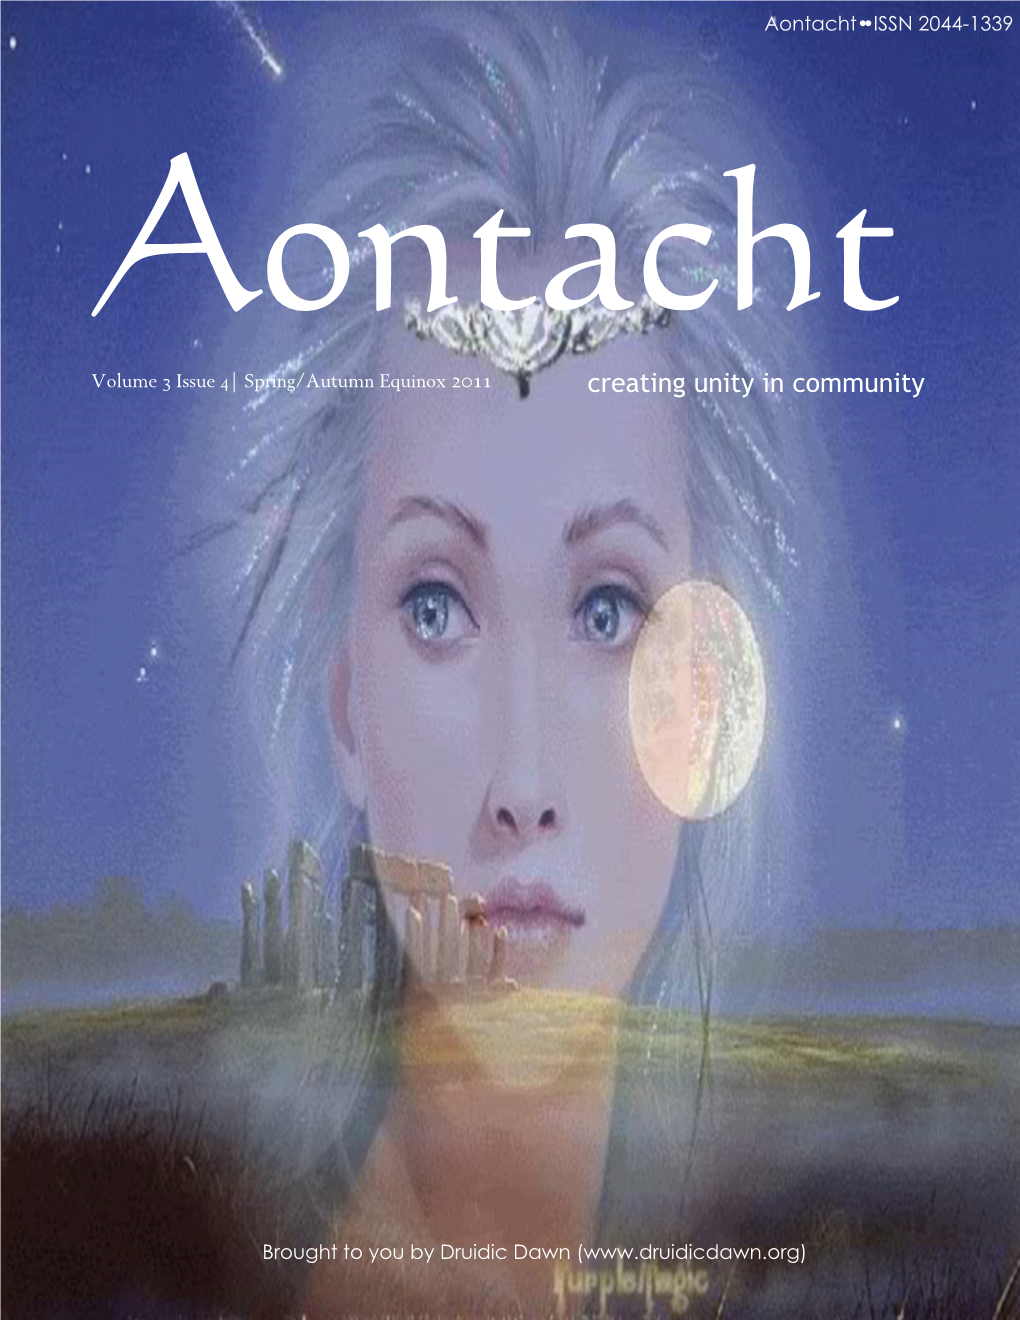 Aontacht Volume 3 Issue 4 Spring